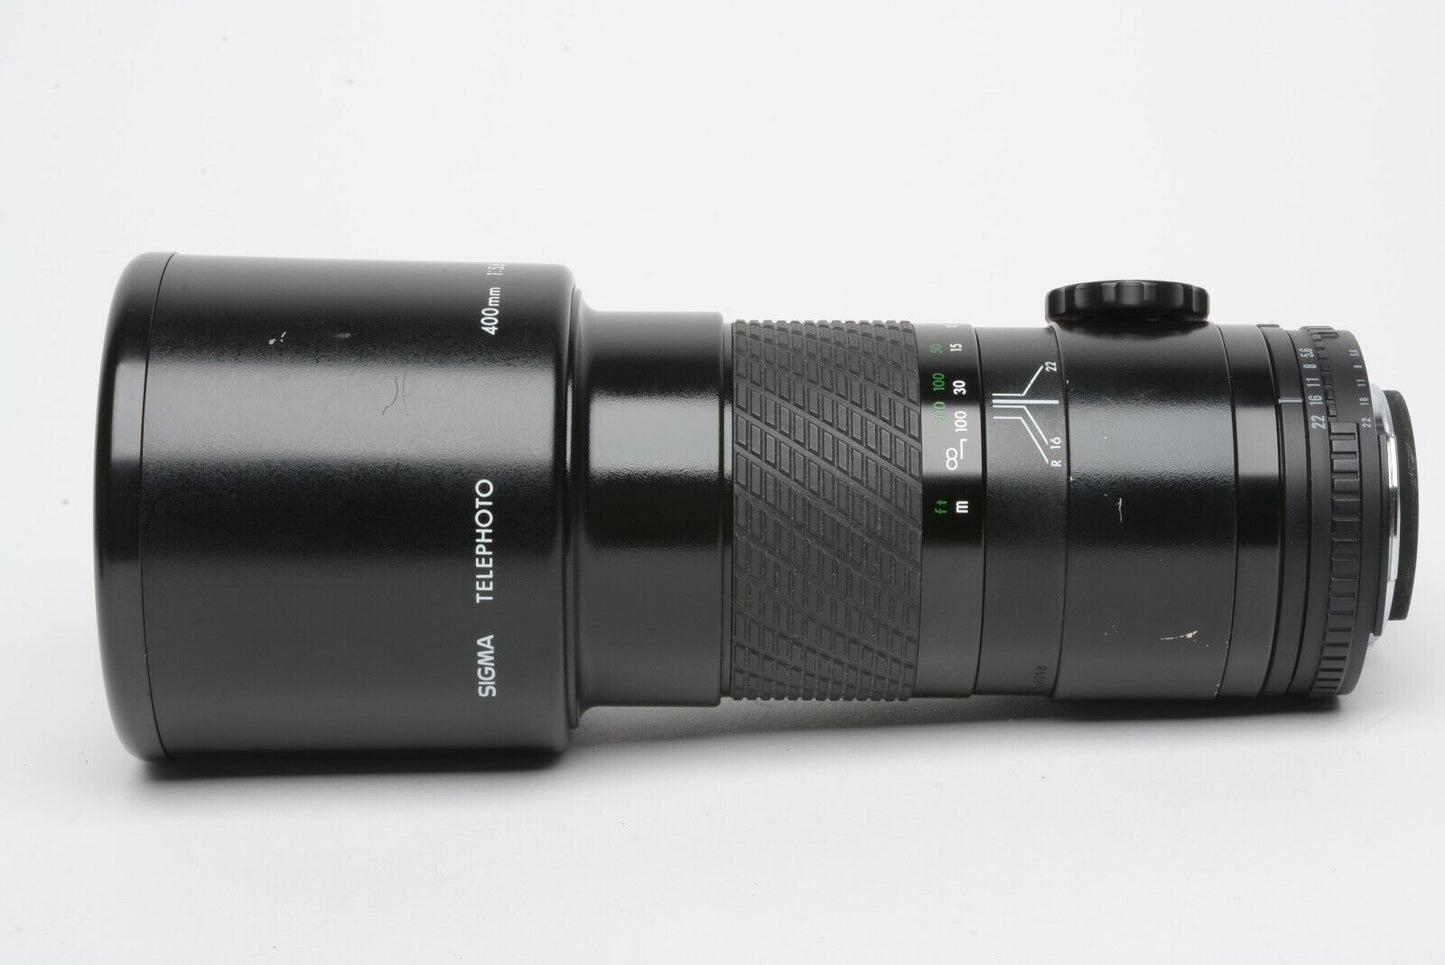 EXC+ SIGMA MF 400mm f5.6 MC LENS FOR NIKON AIS MOUNT, CLEAN AND SHARP w/CASE